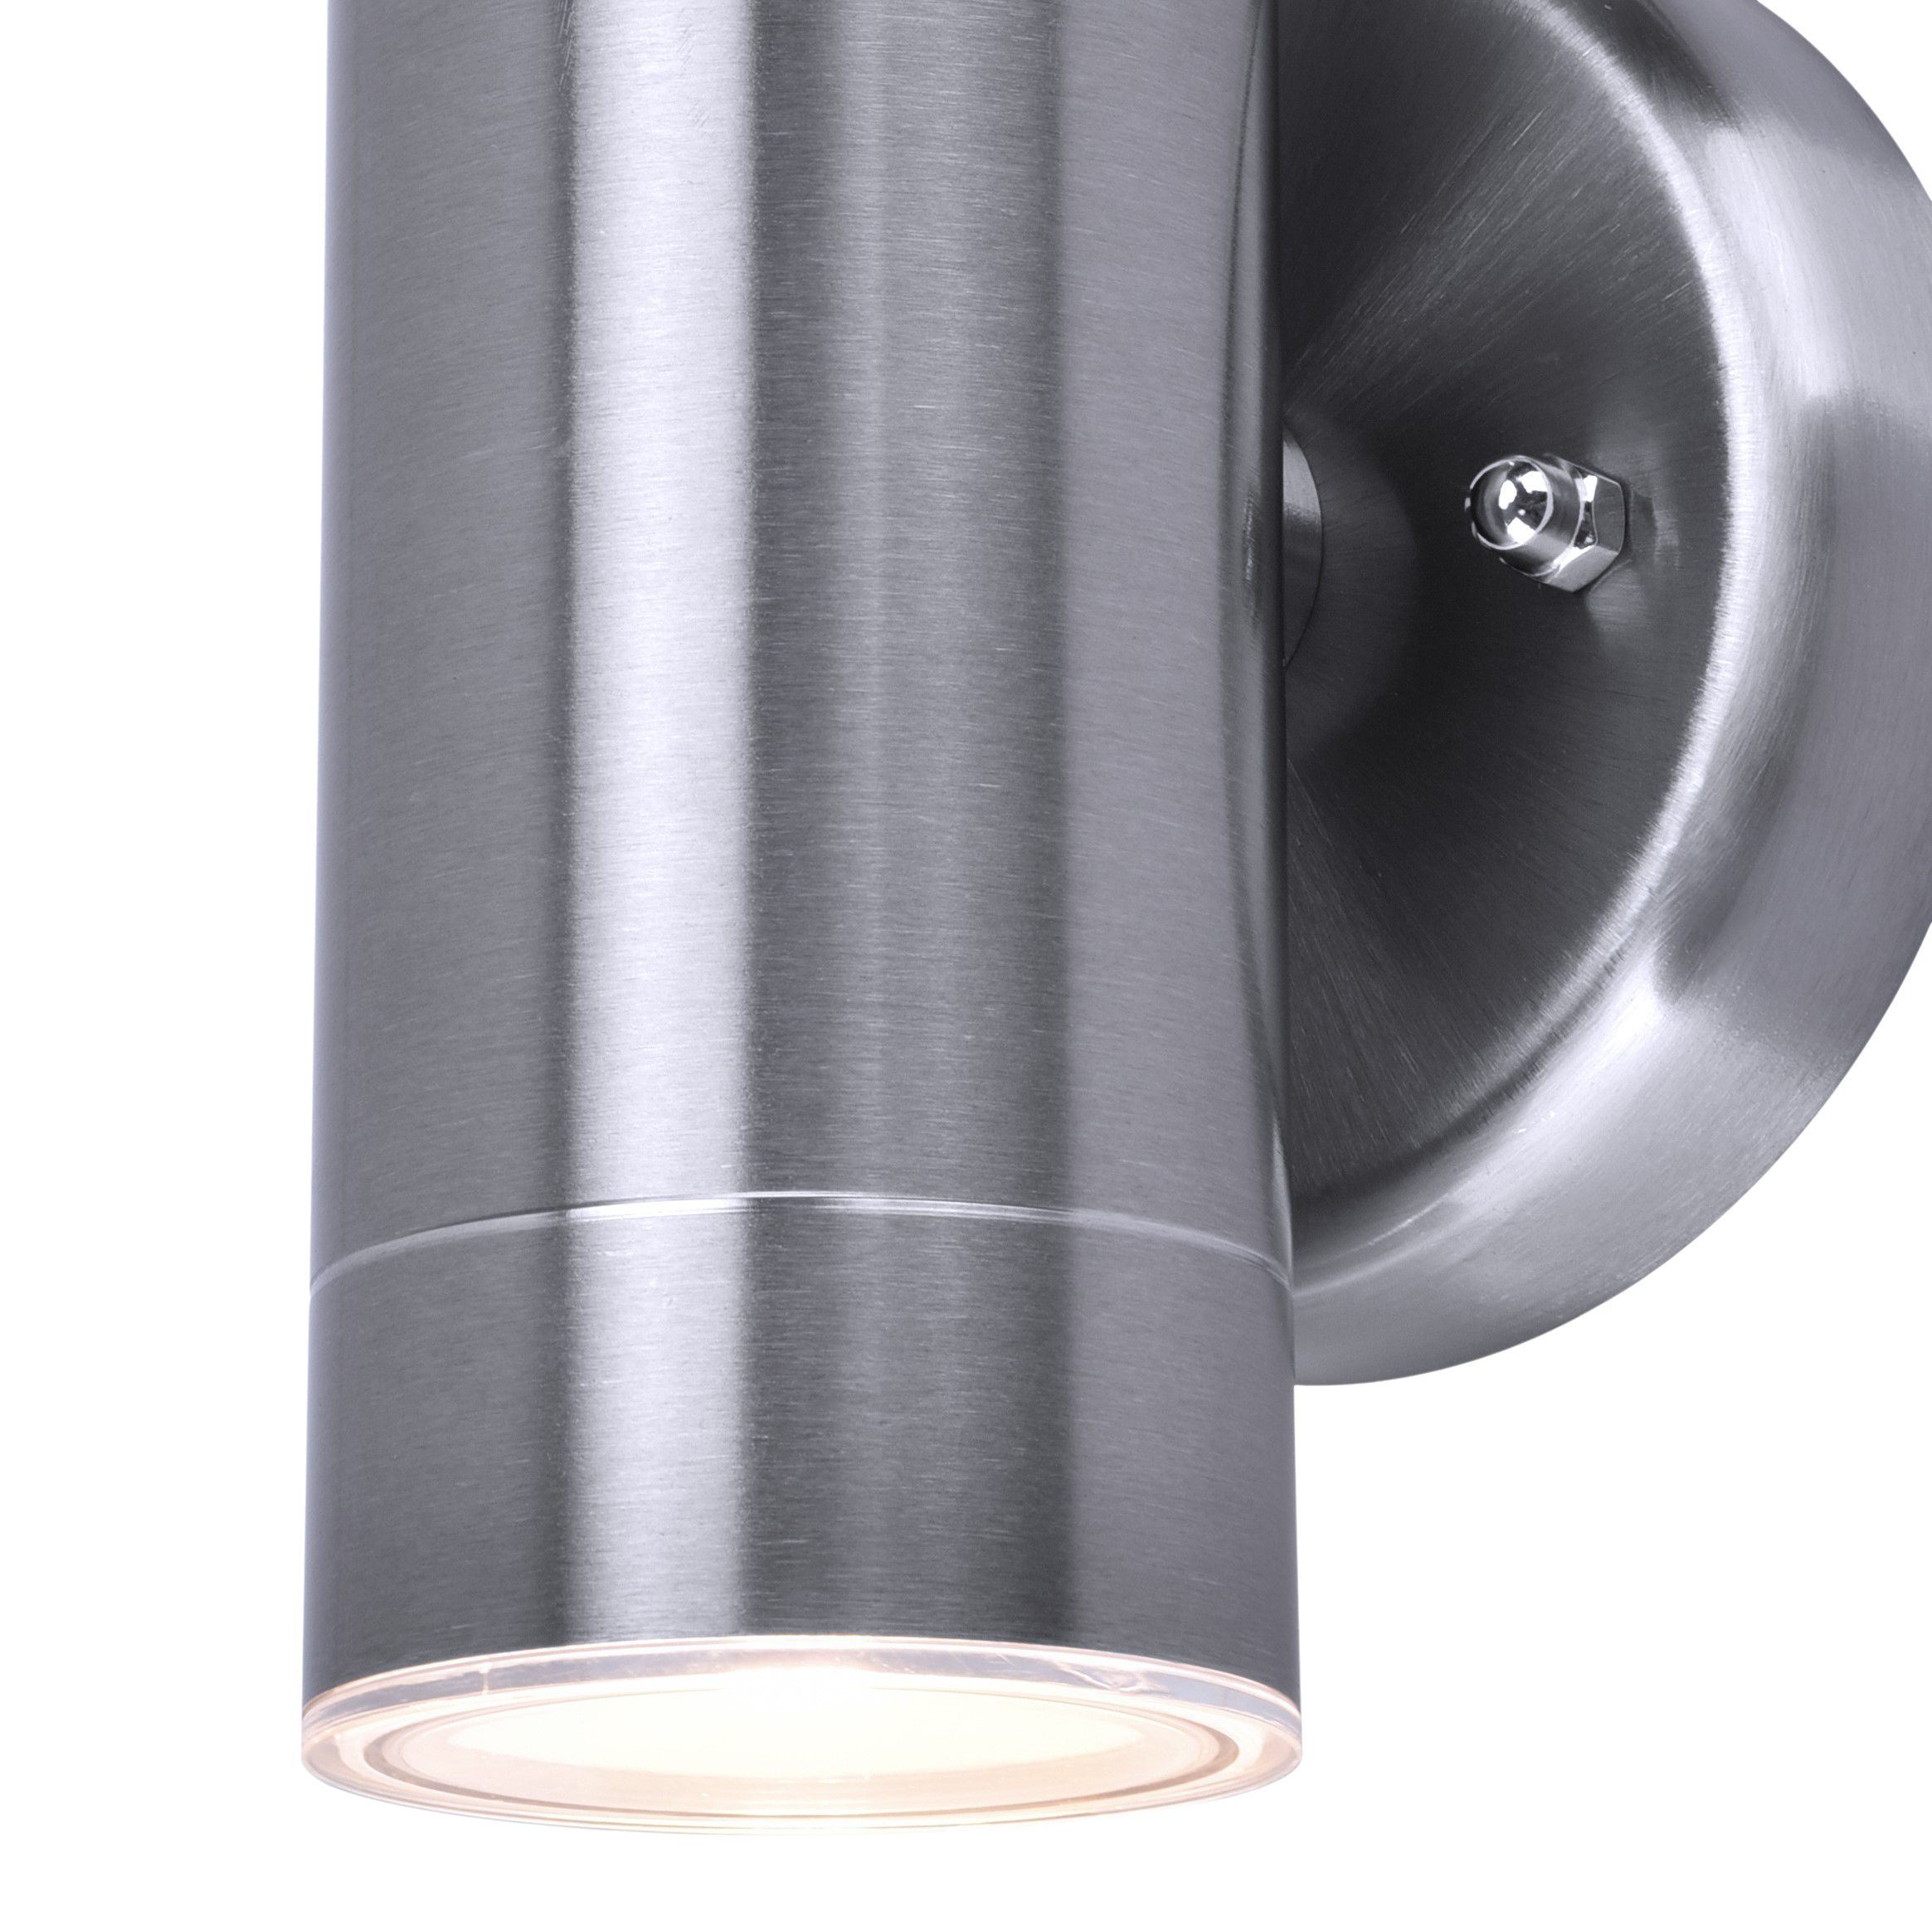 GoodHome Candiac Stainless steel Mains-powered Integrated LED Outdoor Double Wall light 760lm (Dia)6cm